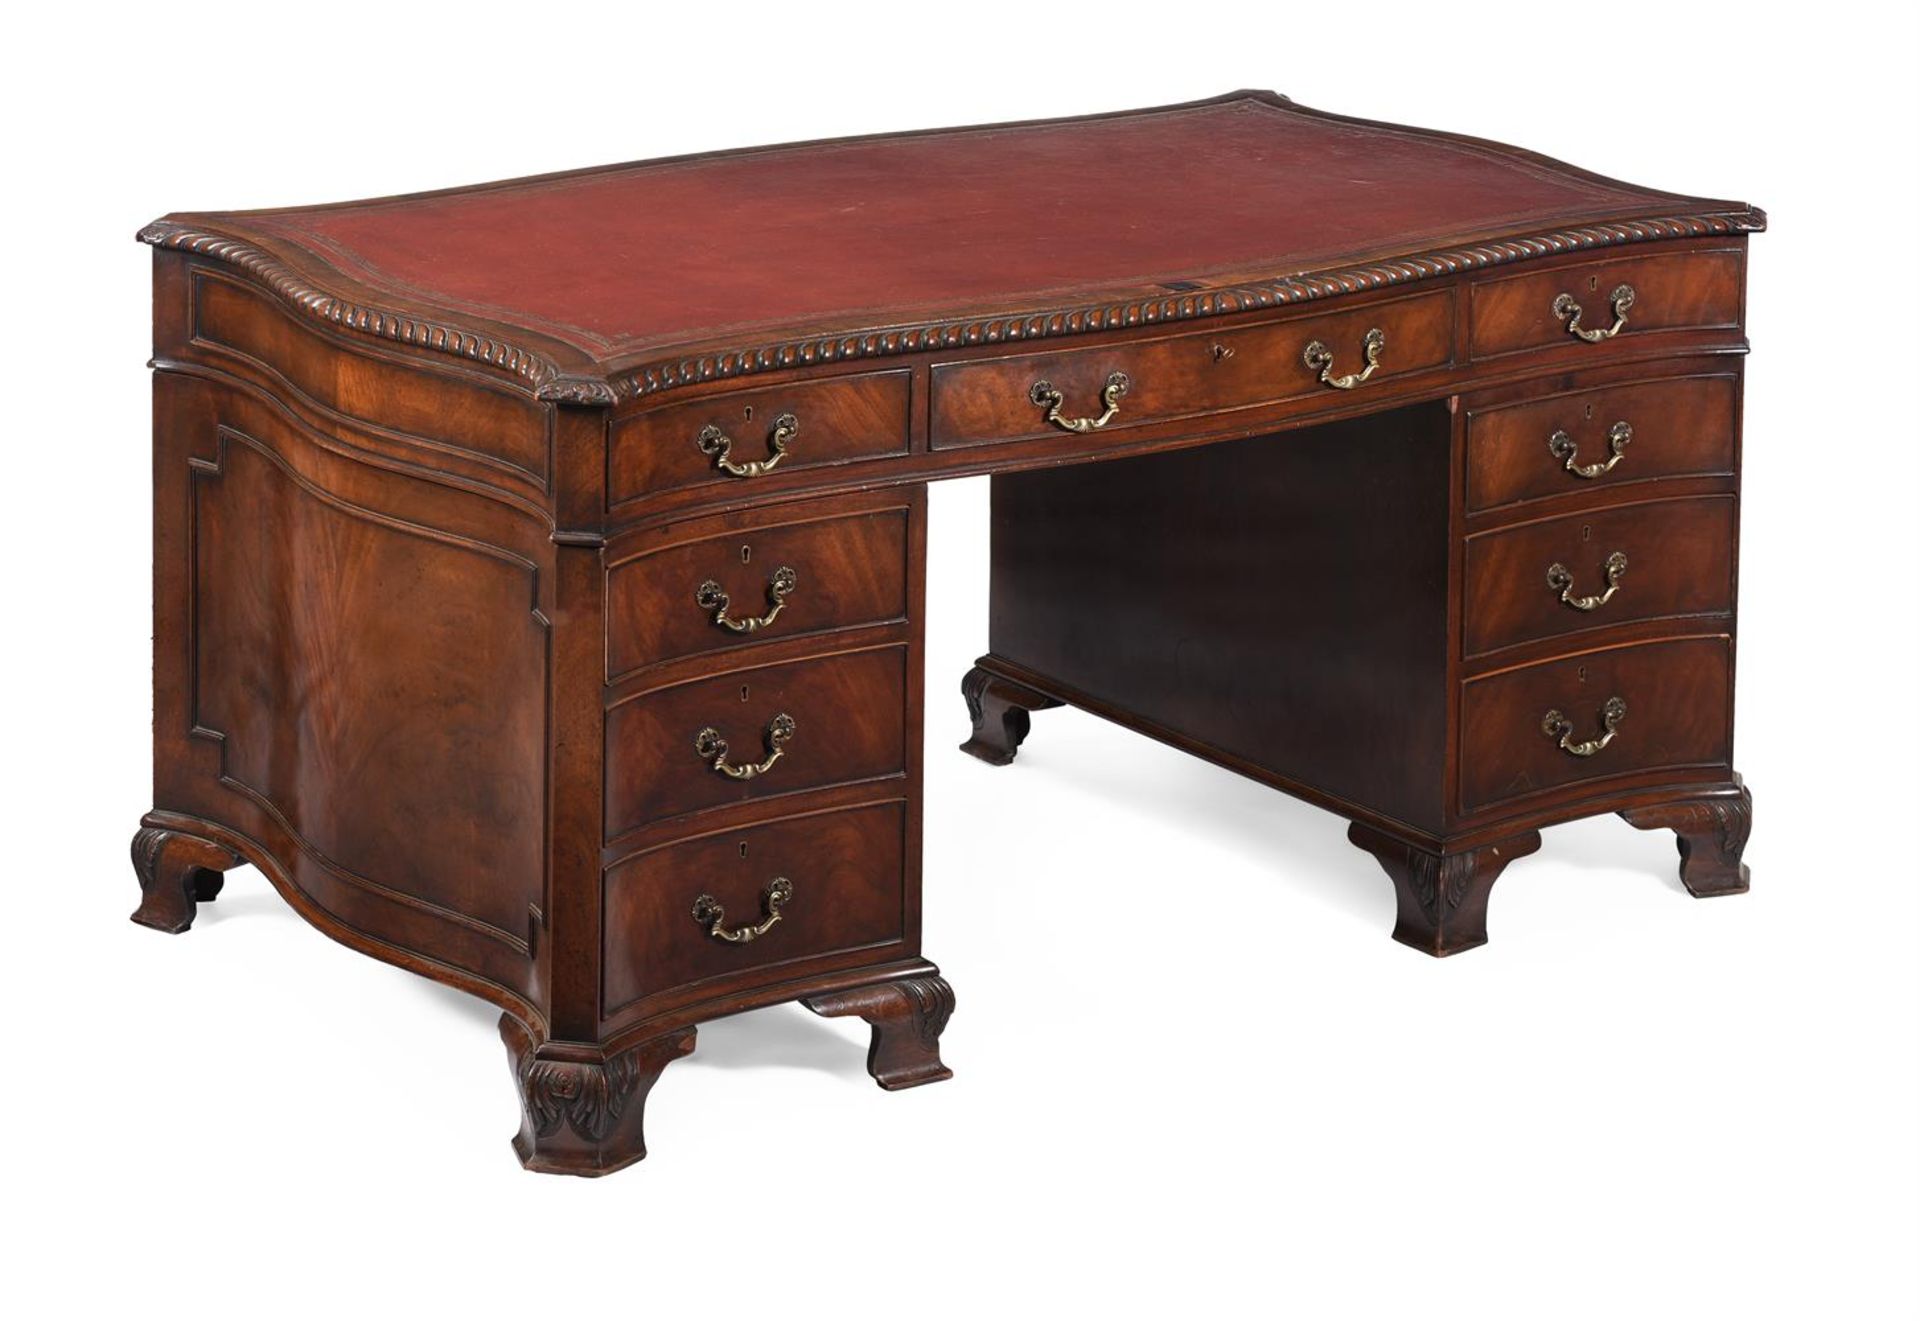 A MAHOGANY SERPENTINE SHAPED PEDESTAL DESK, IN GEORGE III STYLE, 20TH CENTURY